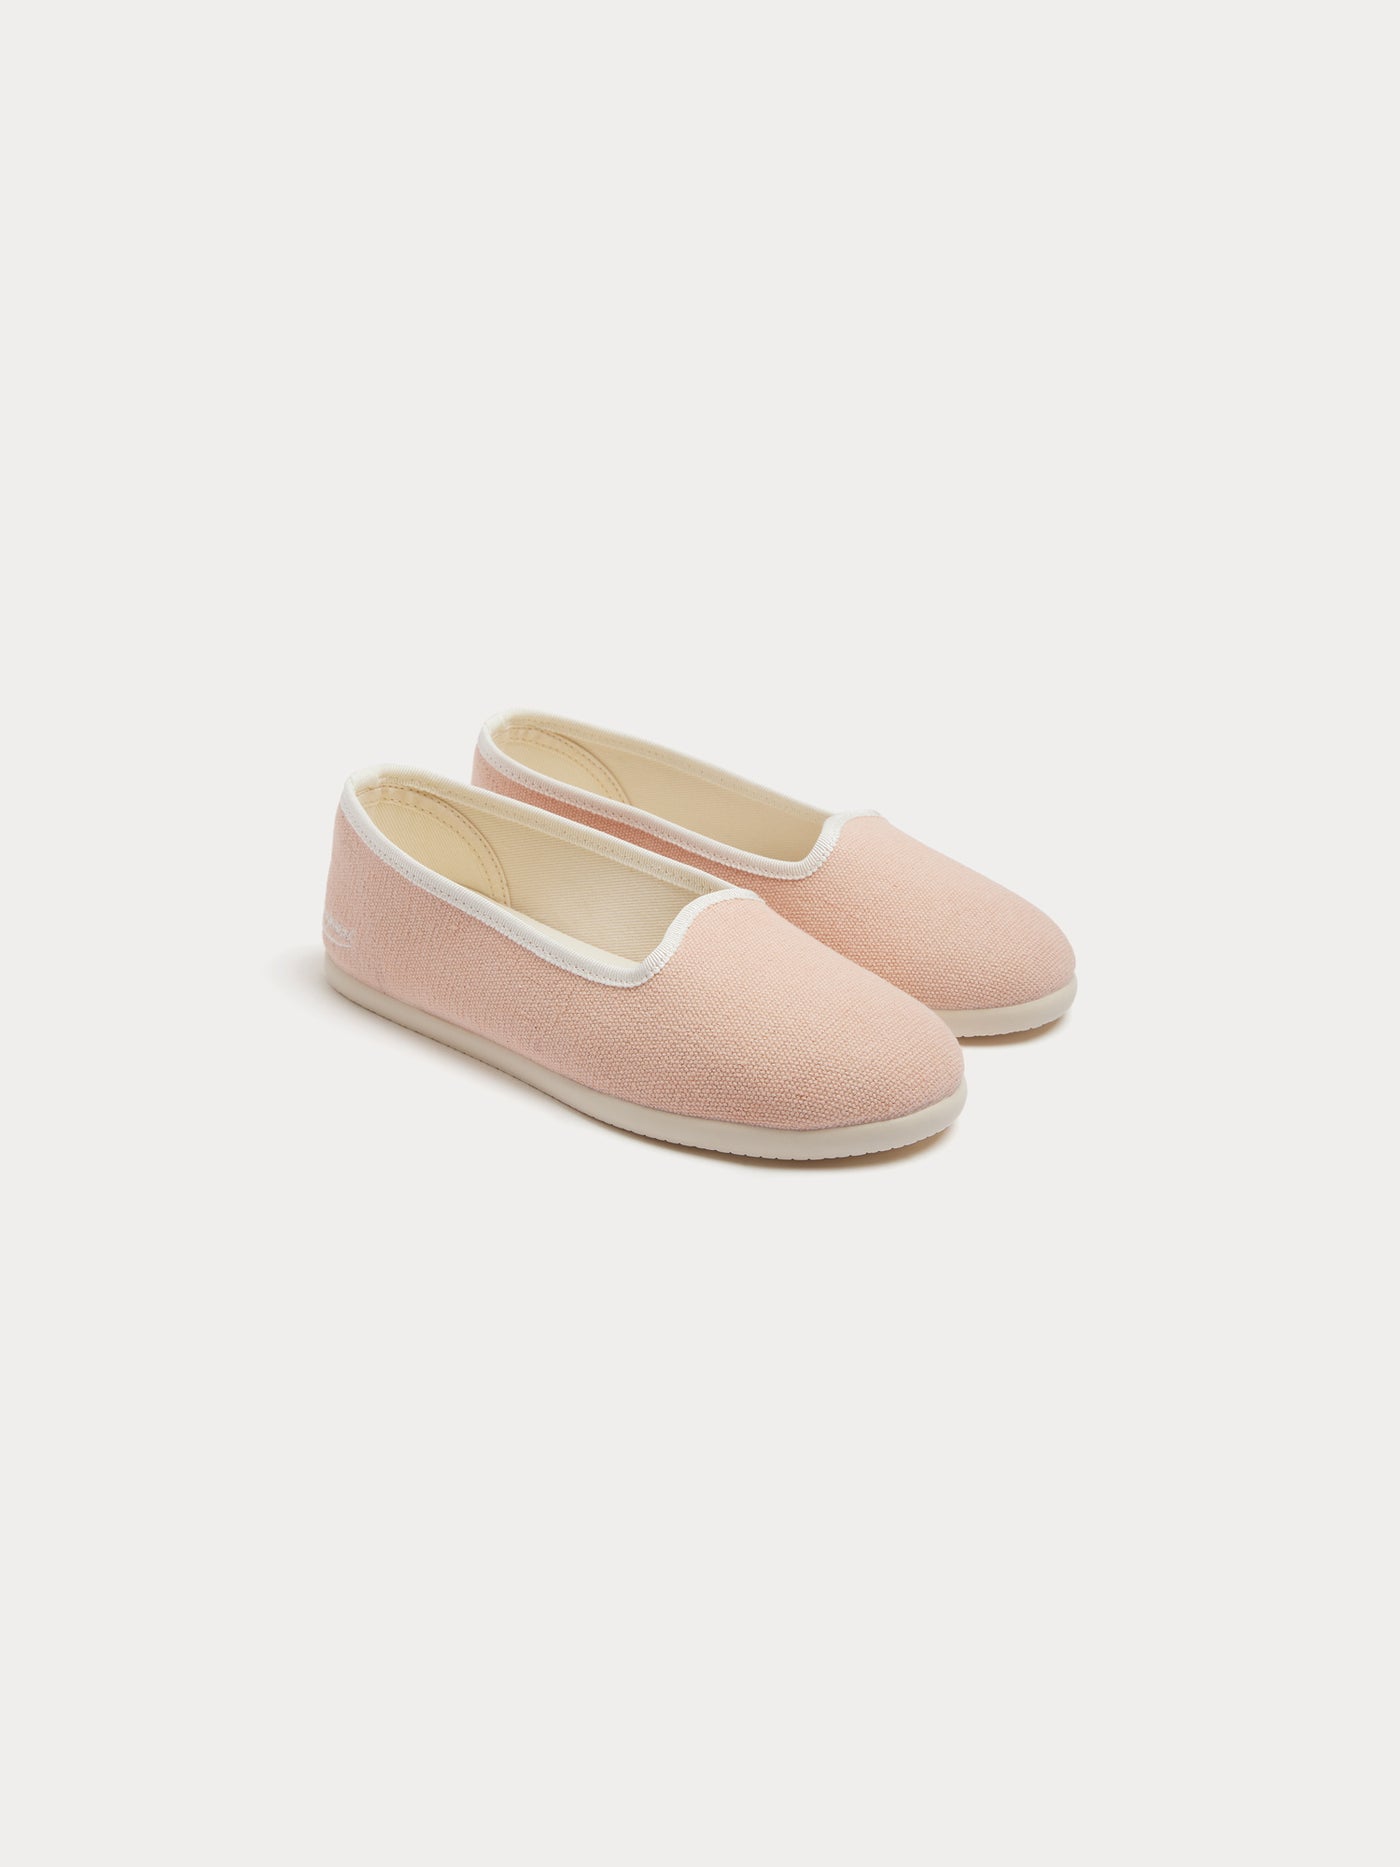 Chaussons Tenise beige rose